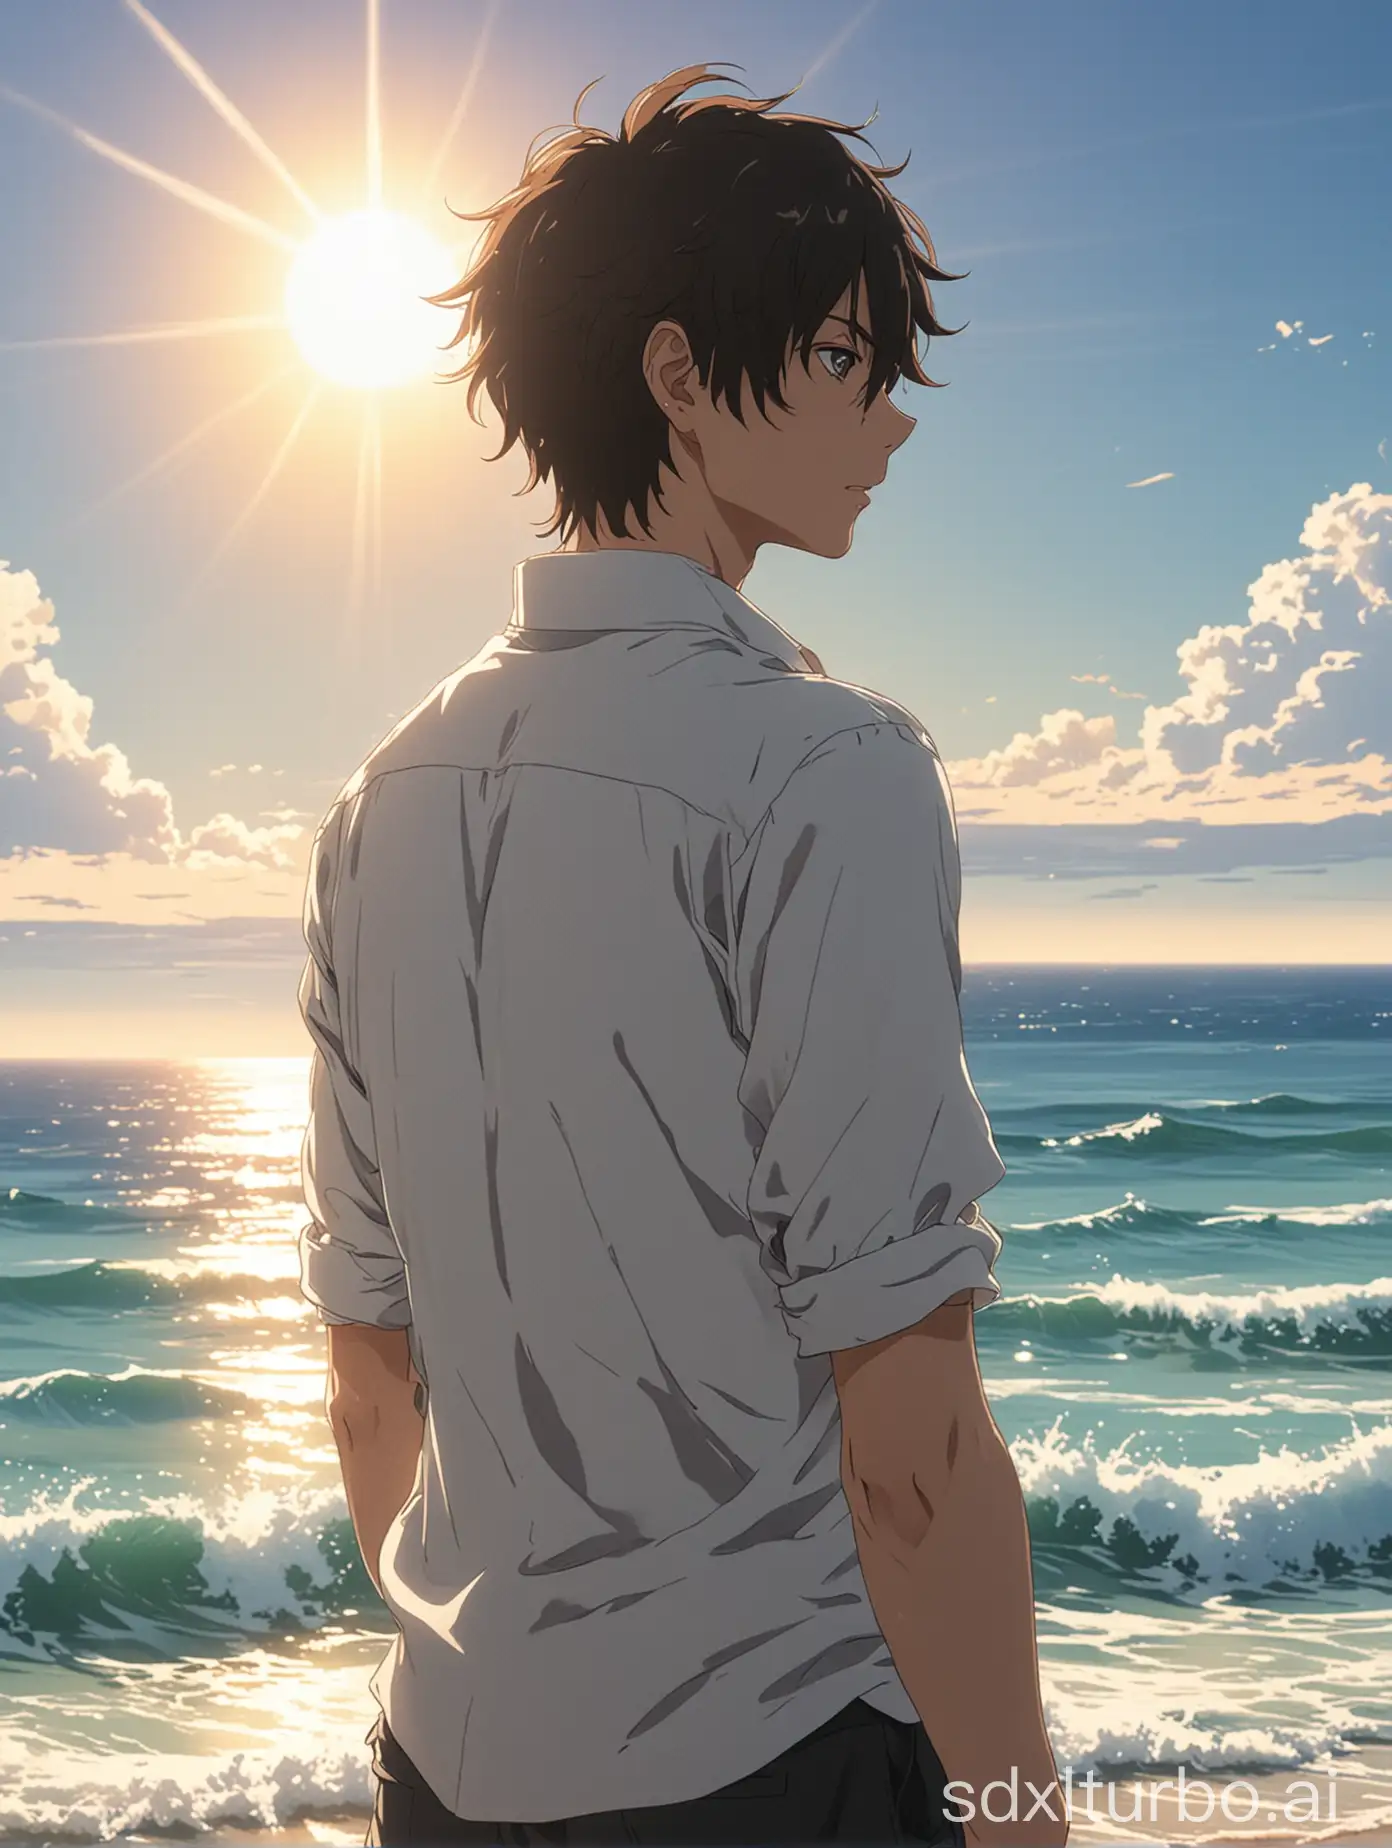 a 30-year-old anime boy with an upwardly mobile spirit, his back facing the sea, bathed in bright sunlight